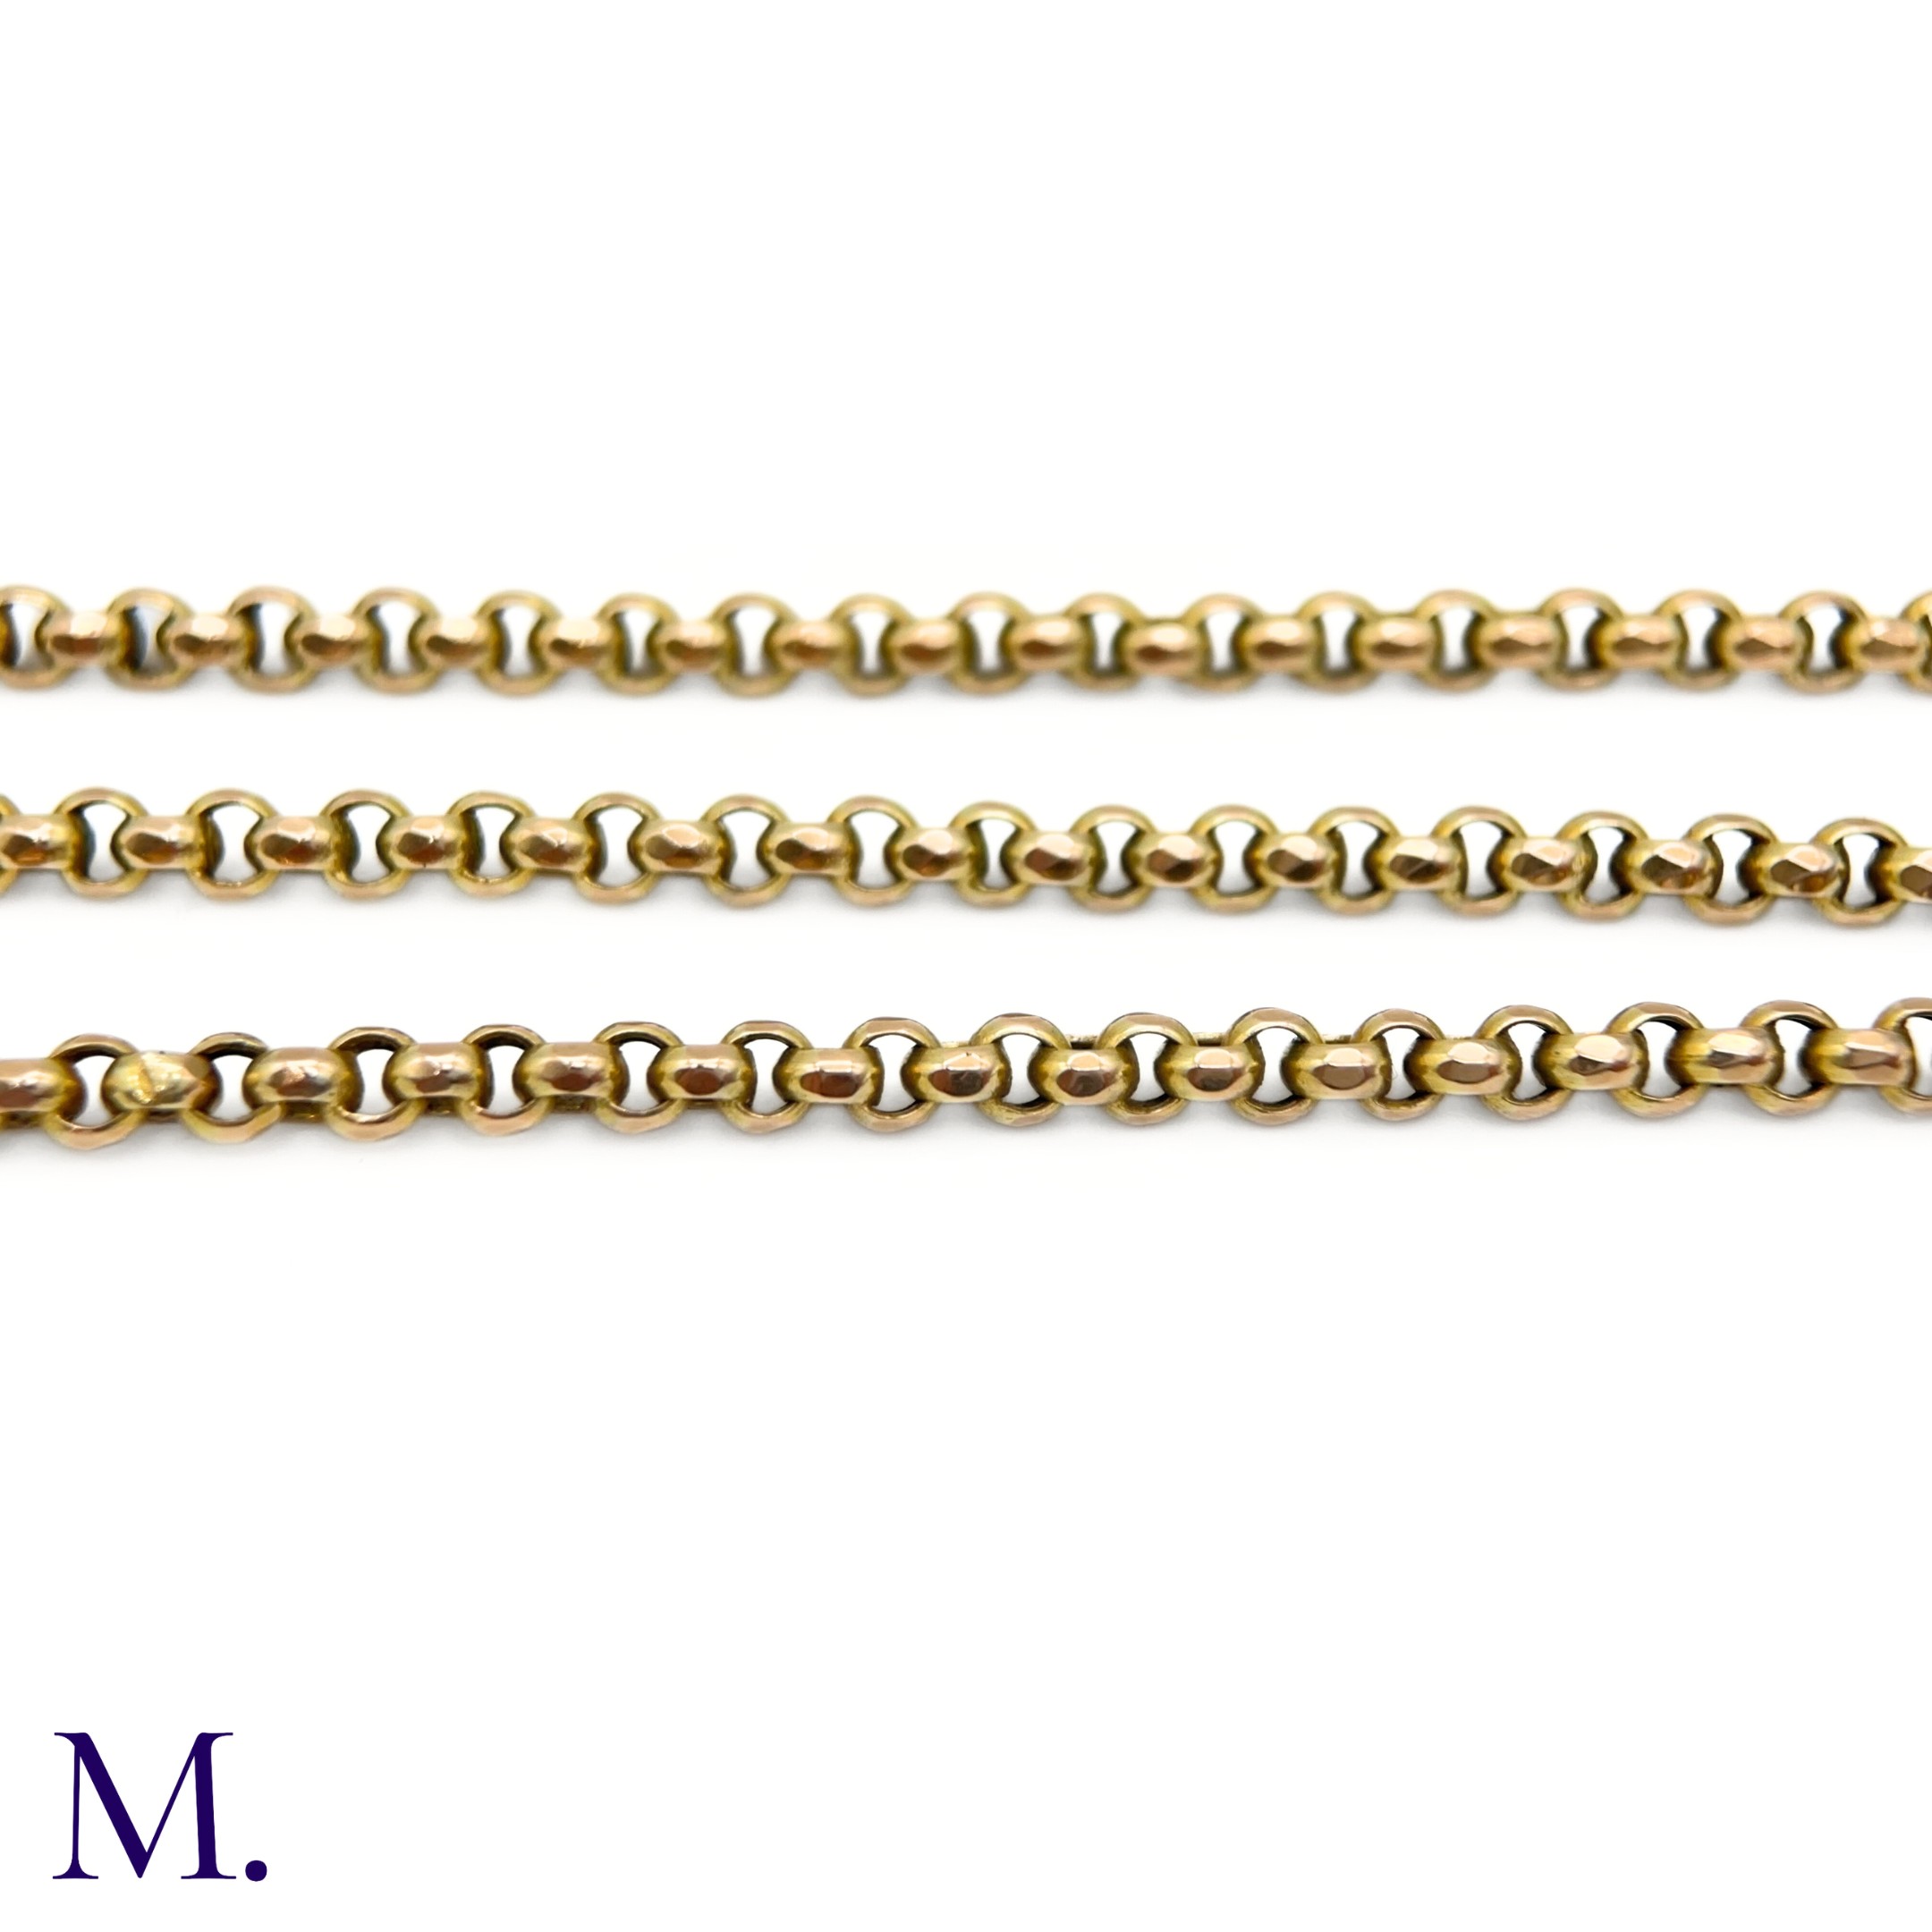 An Antique 9ct Gold Long Guard Chain - Image 4 of 4